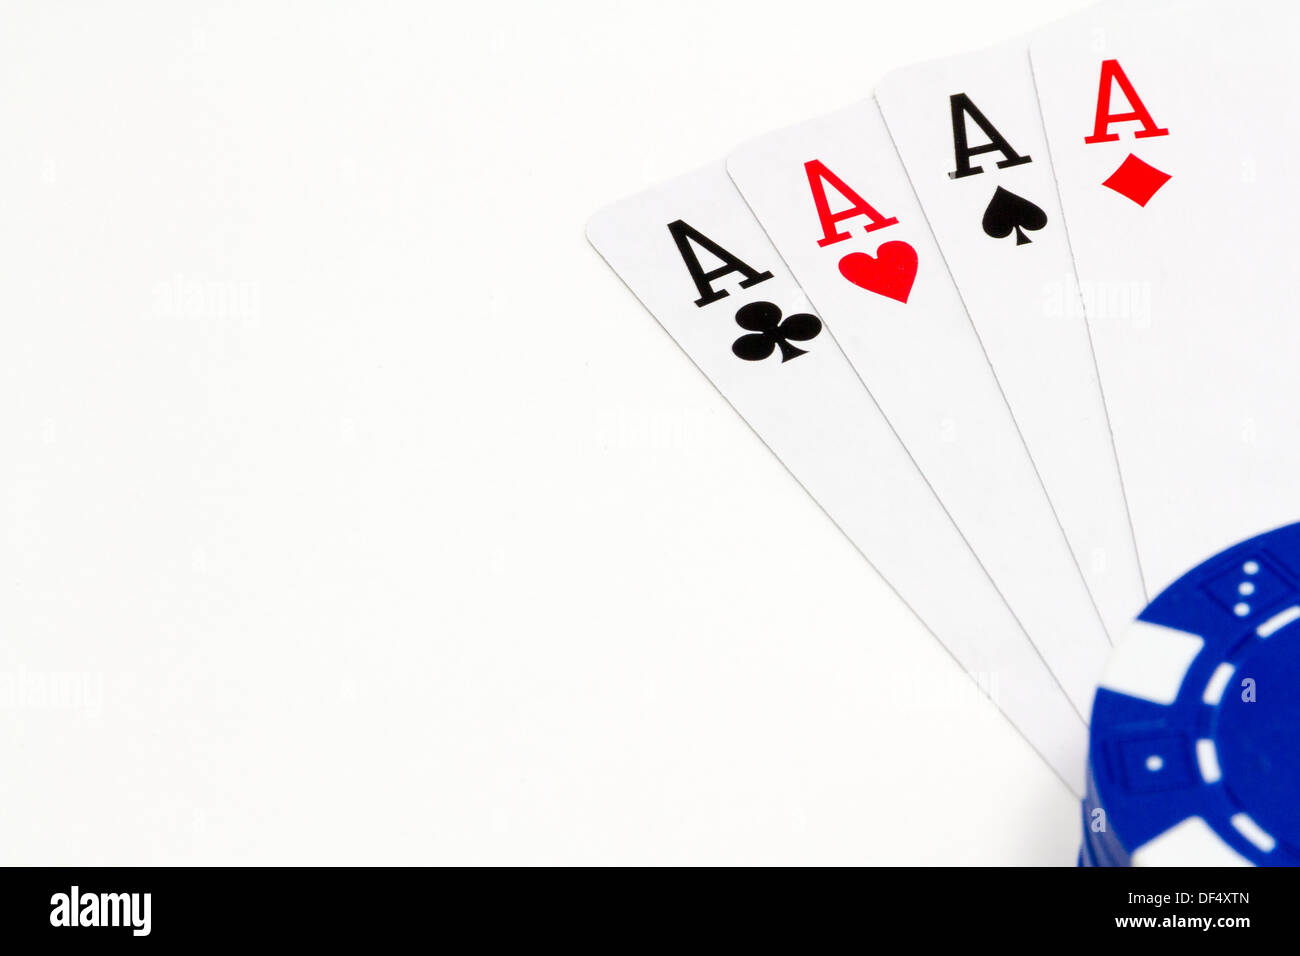 Poker chip and cards isolated on white background Stock Photo